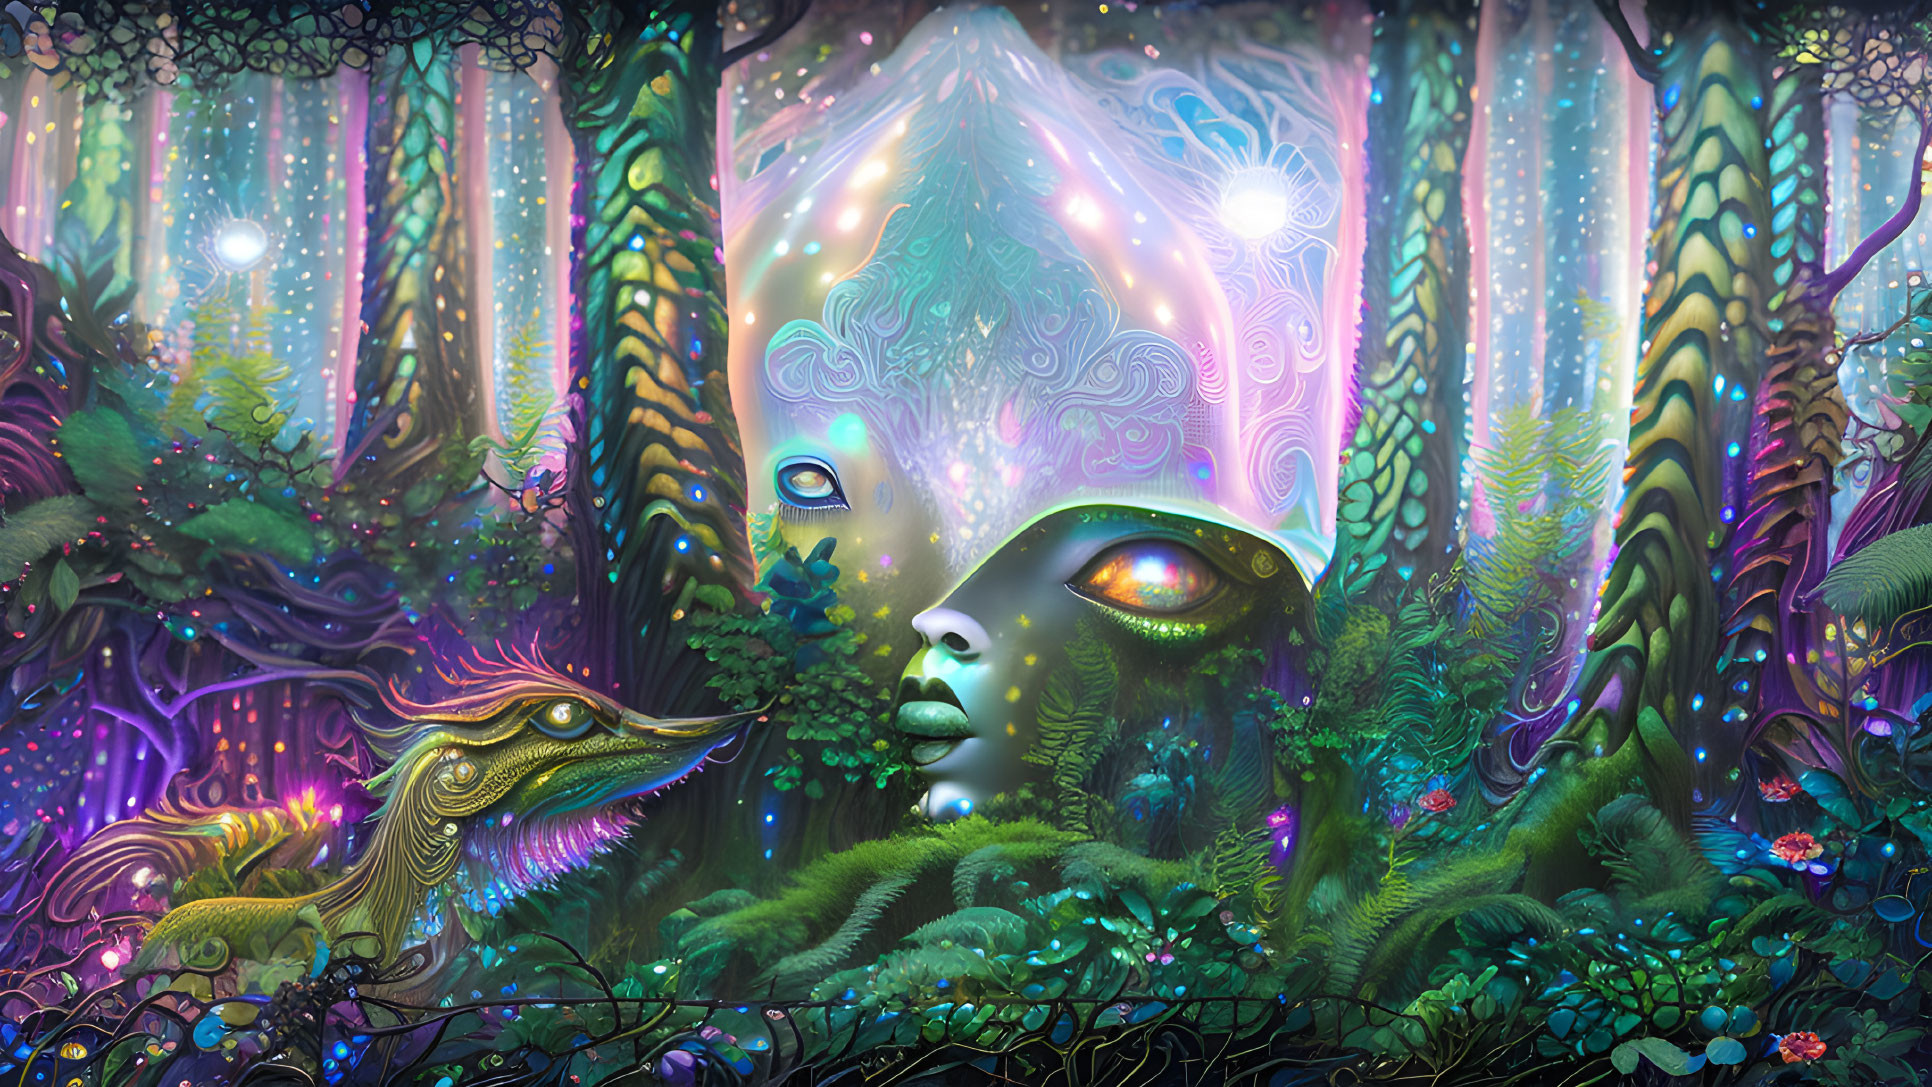 Tripping in the Reptile Forest of the Mushroom Era